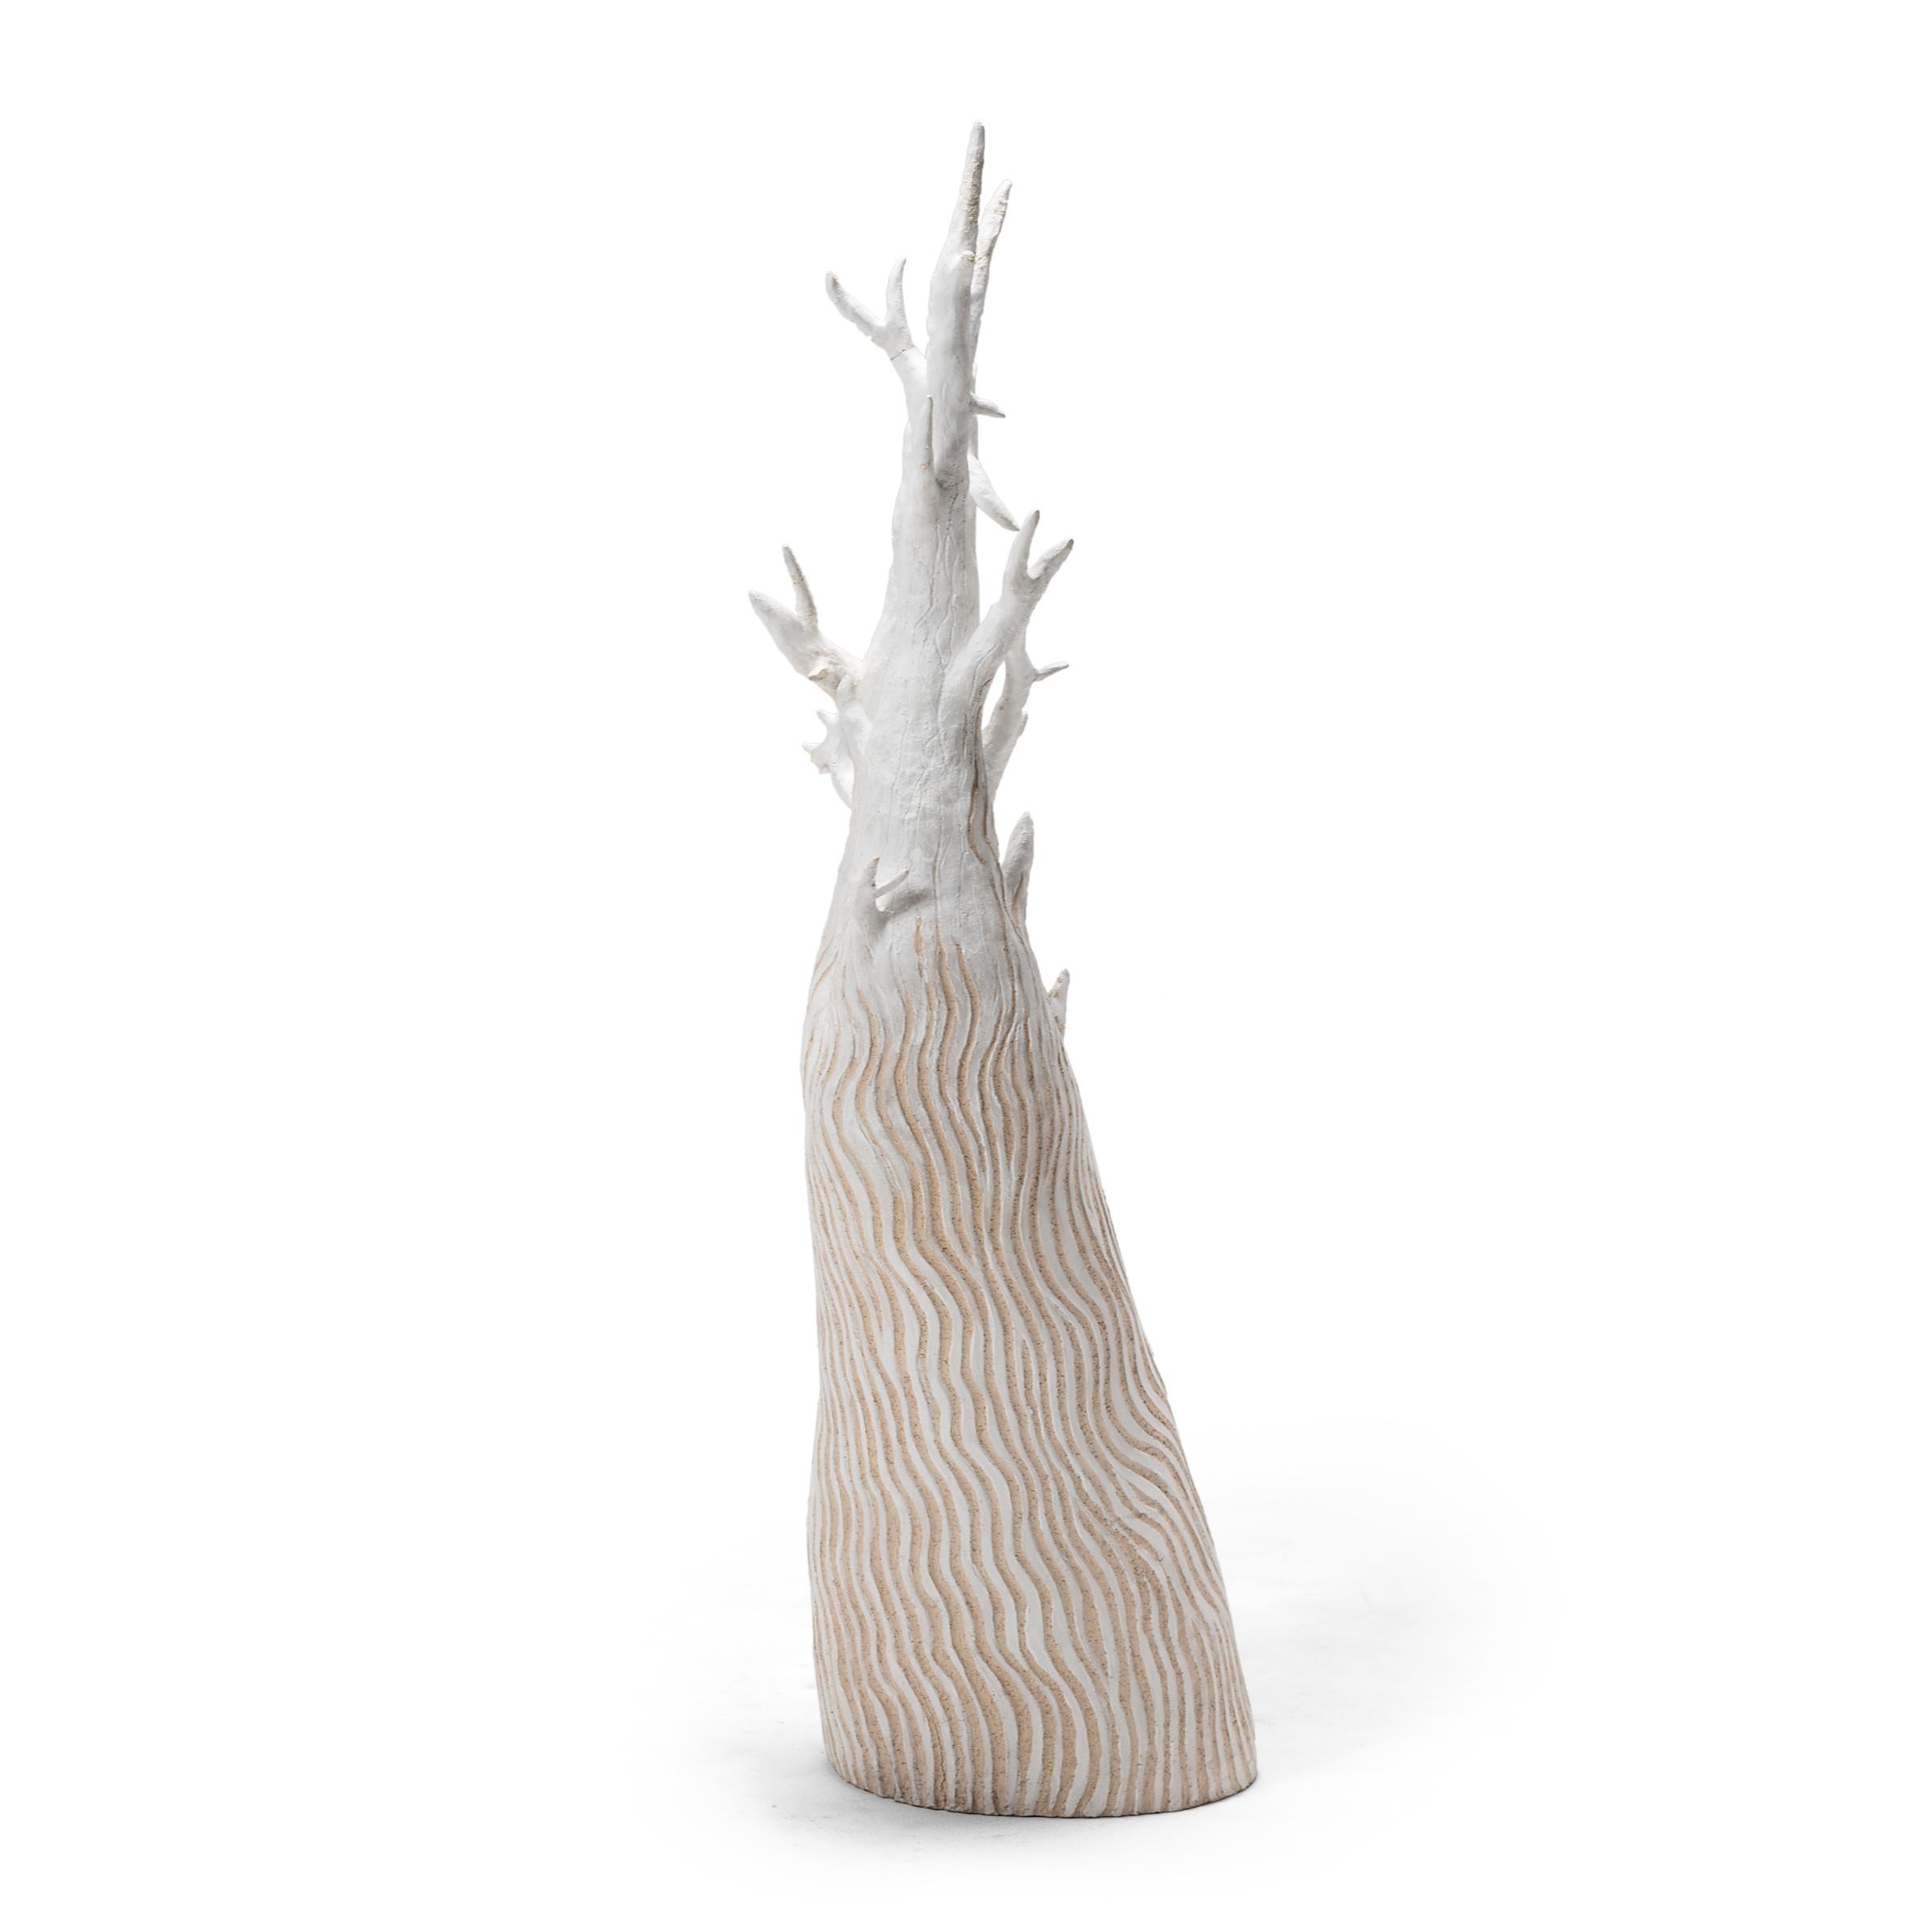 Decorated with meandering incised linework, this sculptural ceramic tree is a playful way to add texture and contrasting color to any interior. We love the petite tree as a display for hanging objects or a whimsical centerpiece.